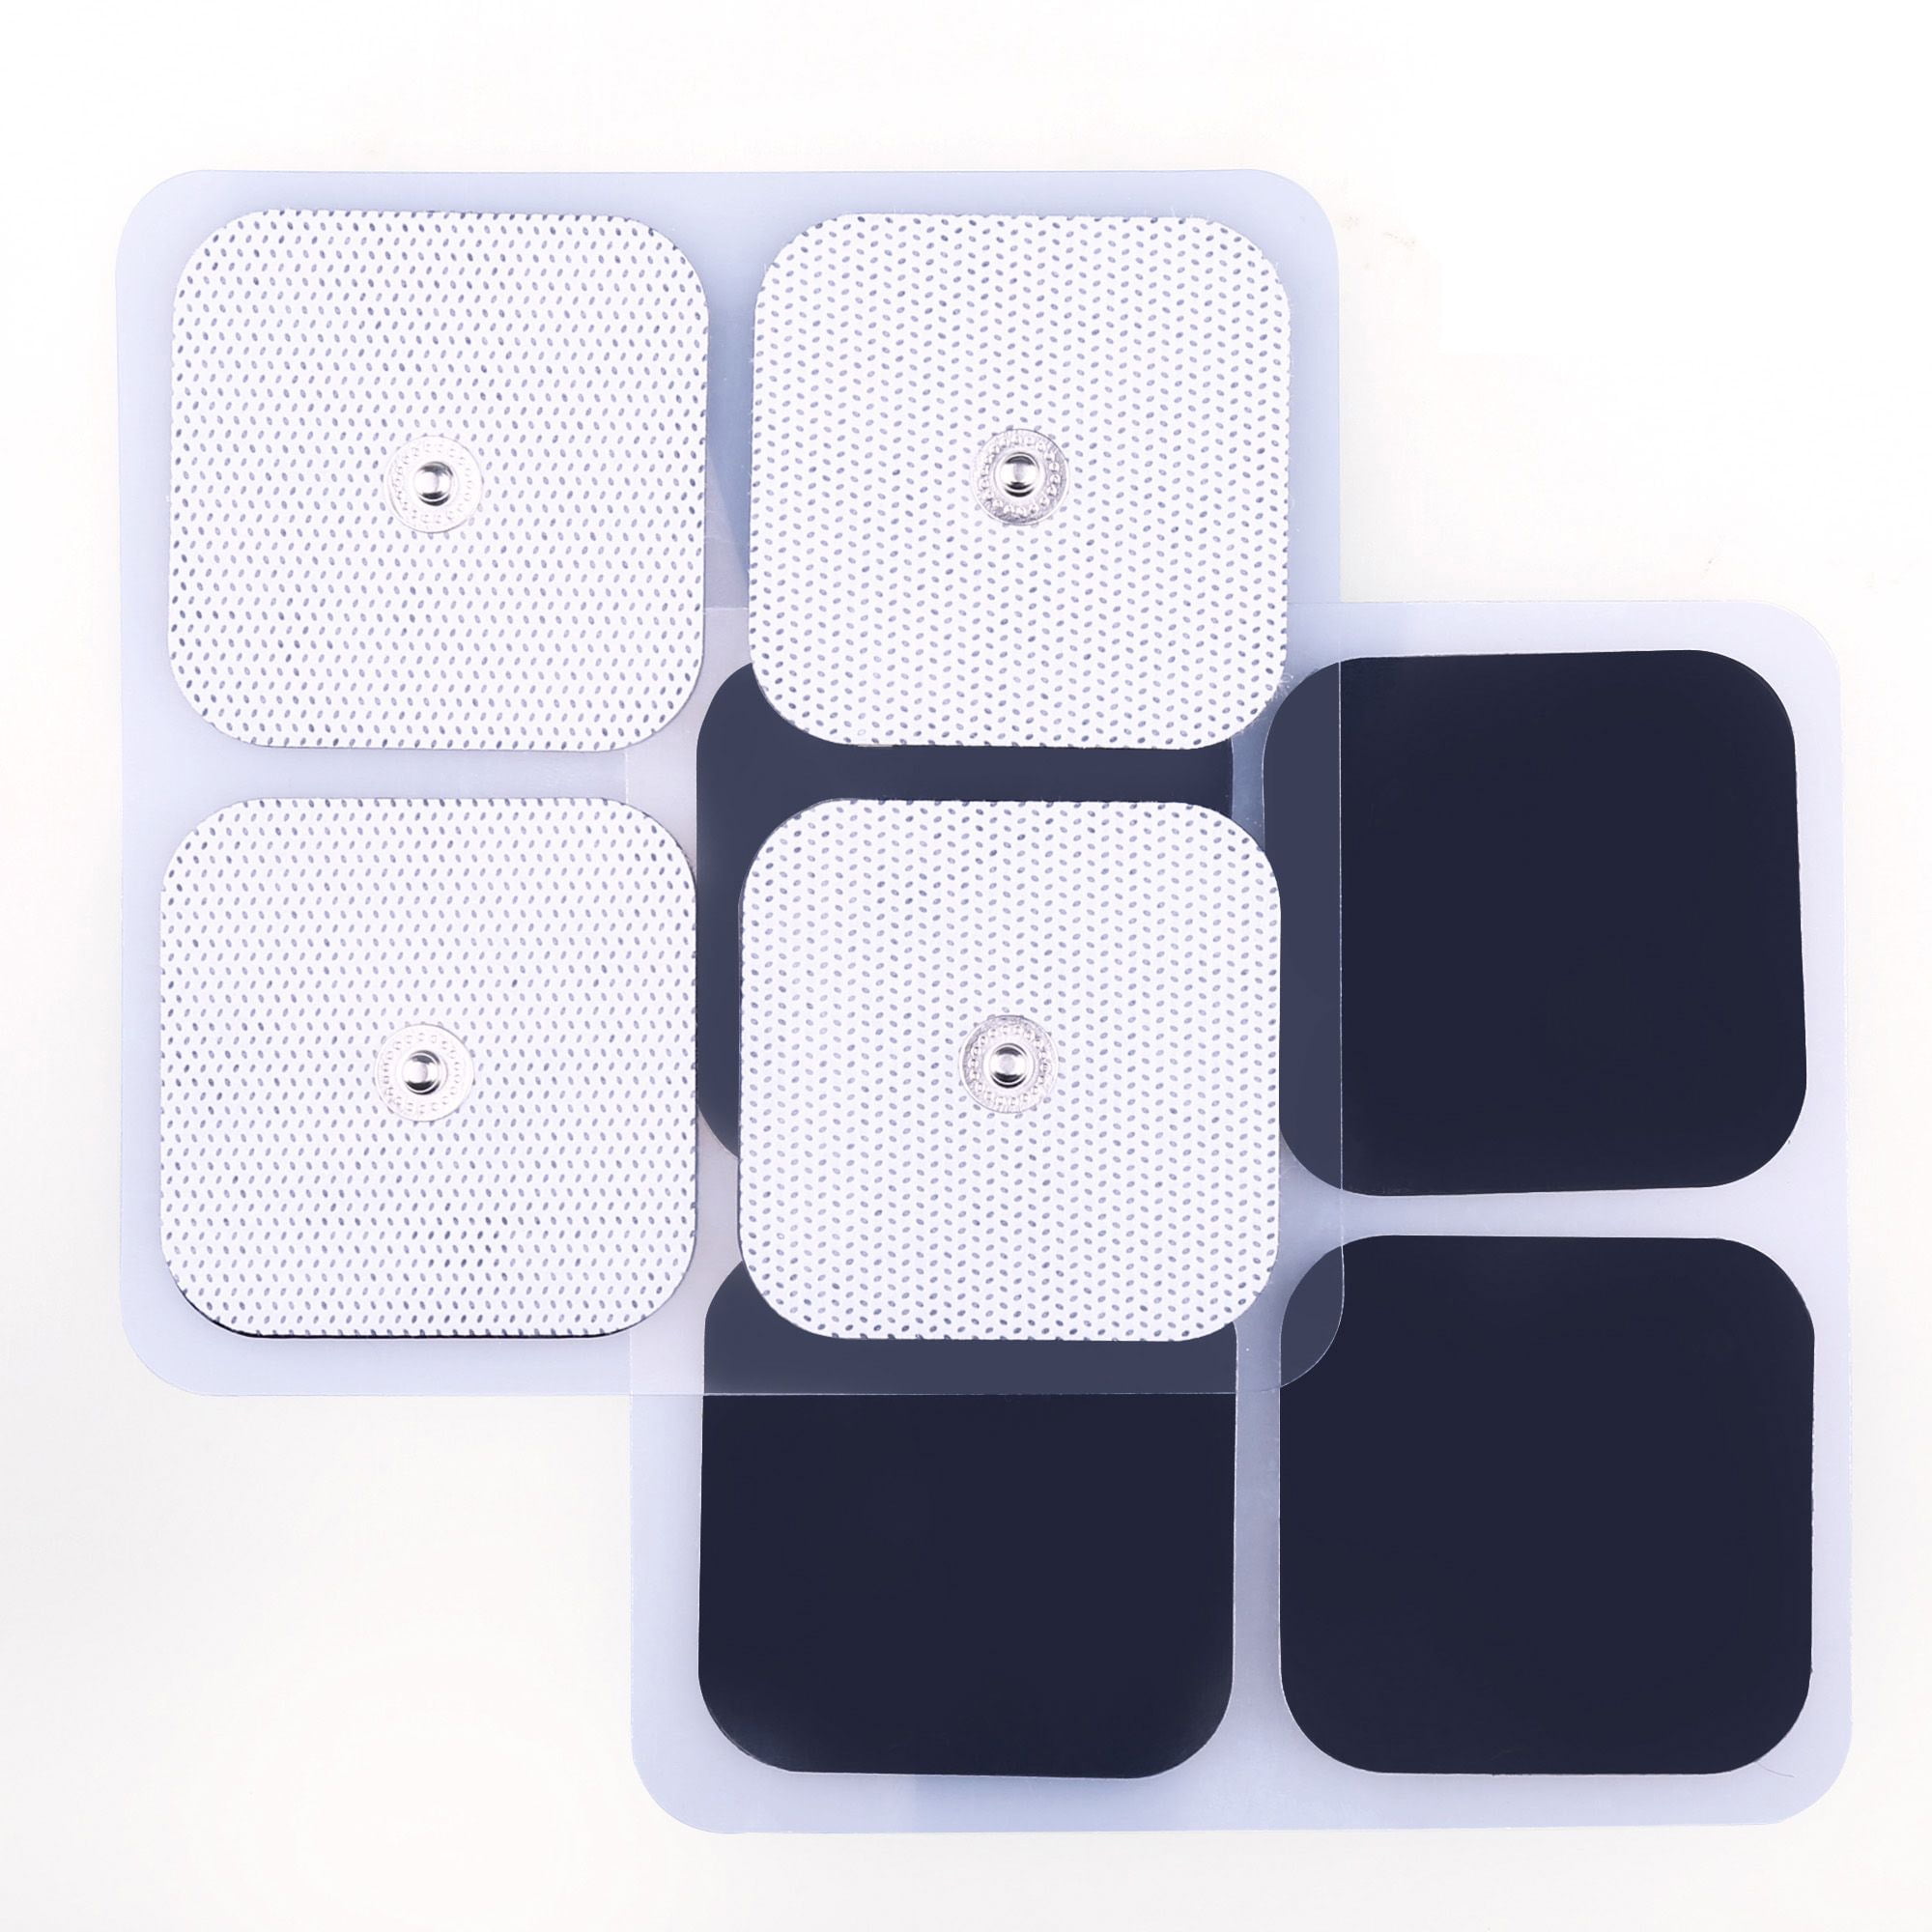 2/4/6/8/10/20/40/60/80/100 Pack Unit Replacement Pads, Electrode Squares  for Muscle Stimulation & Therapy 2 x 2 Stimulator Pad Set 